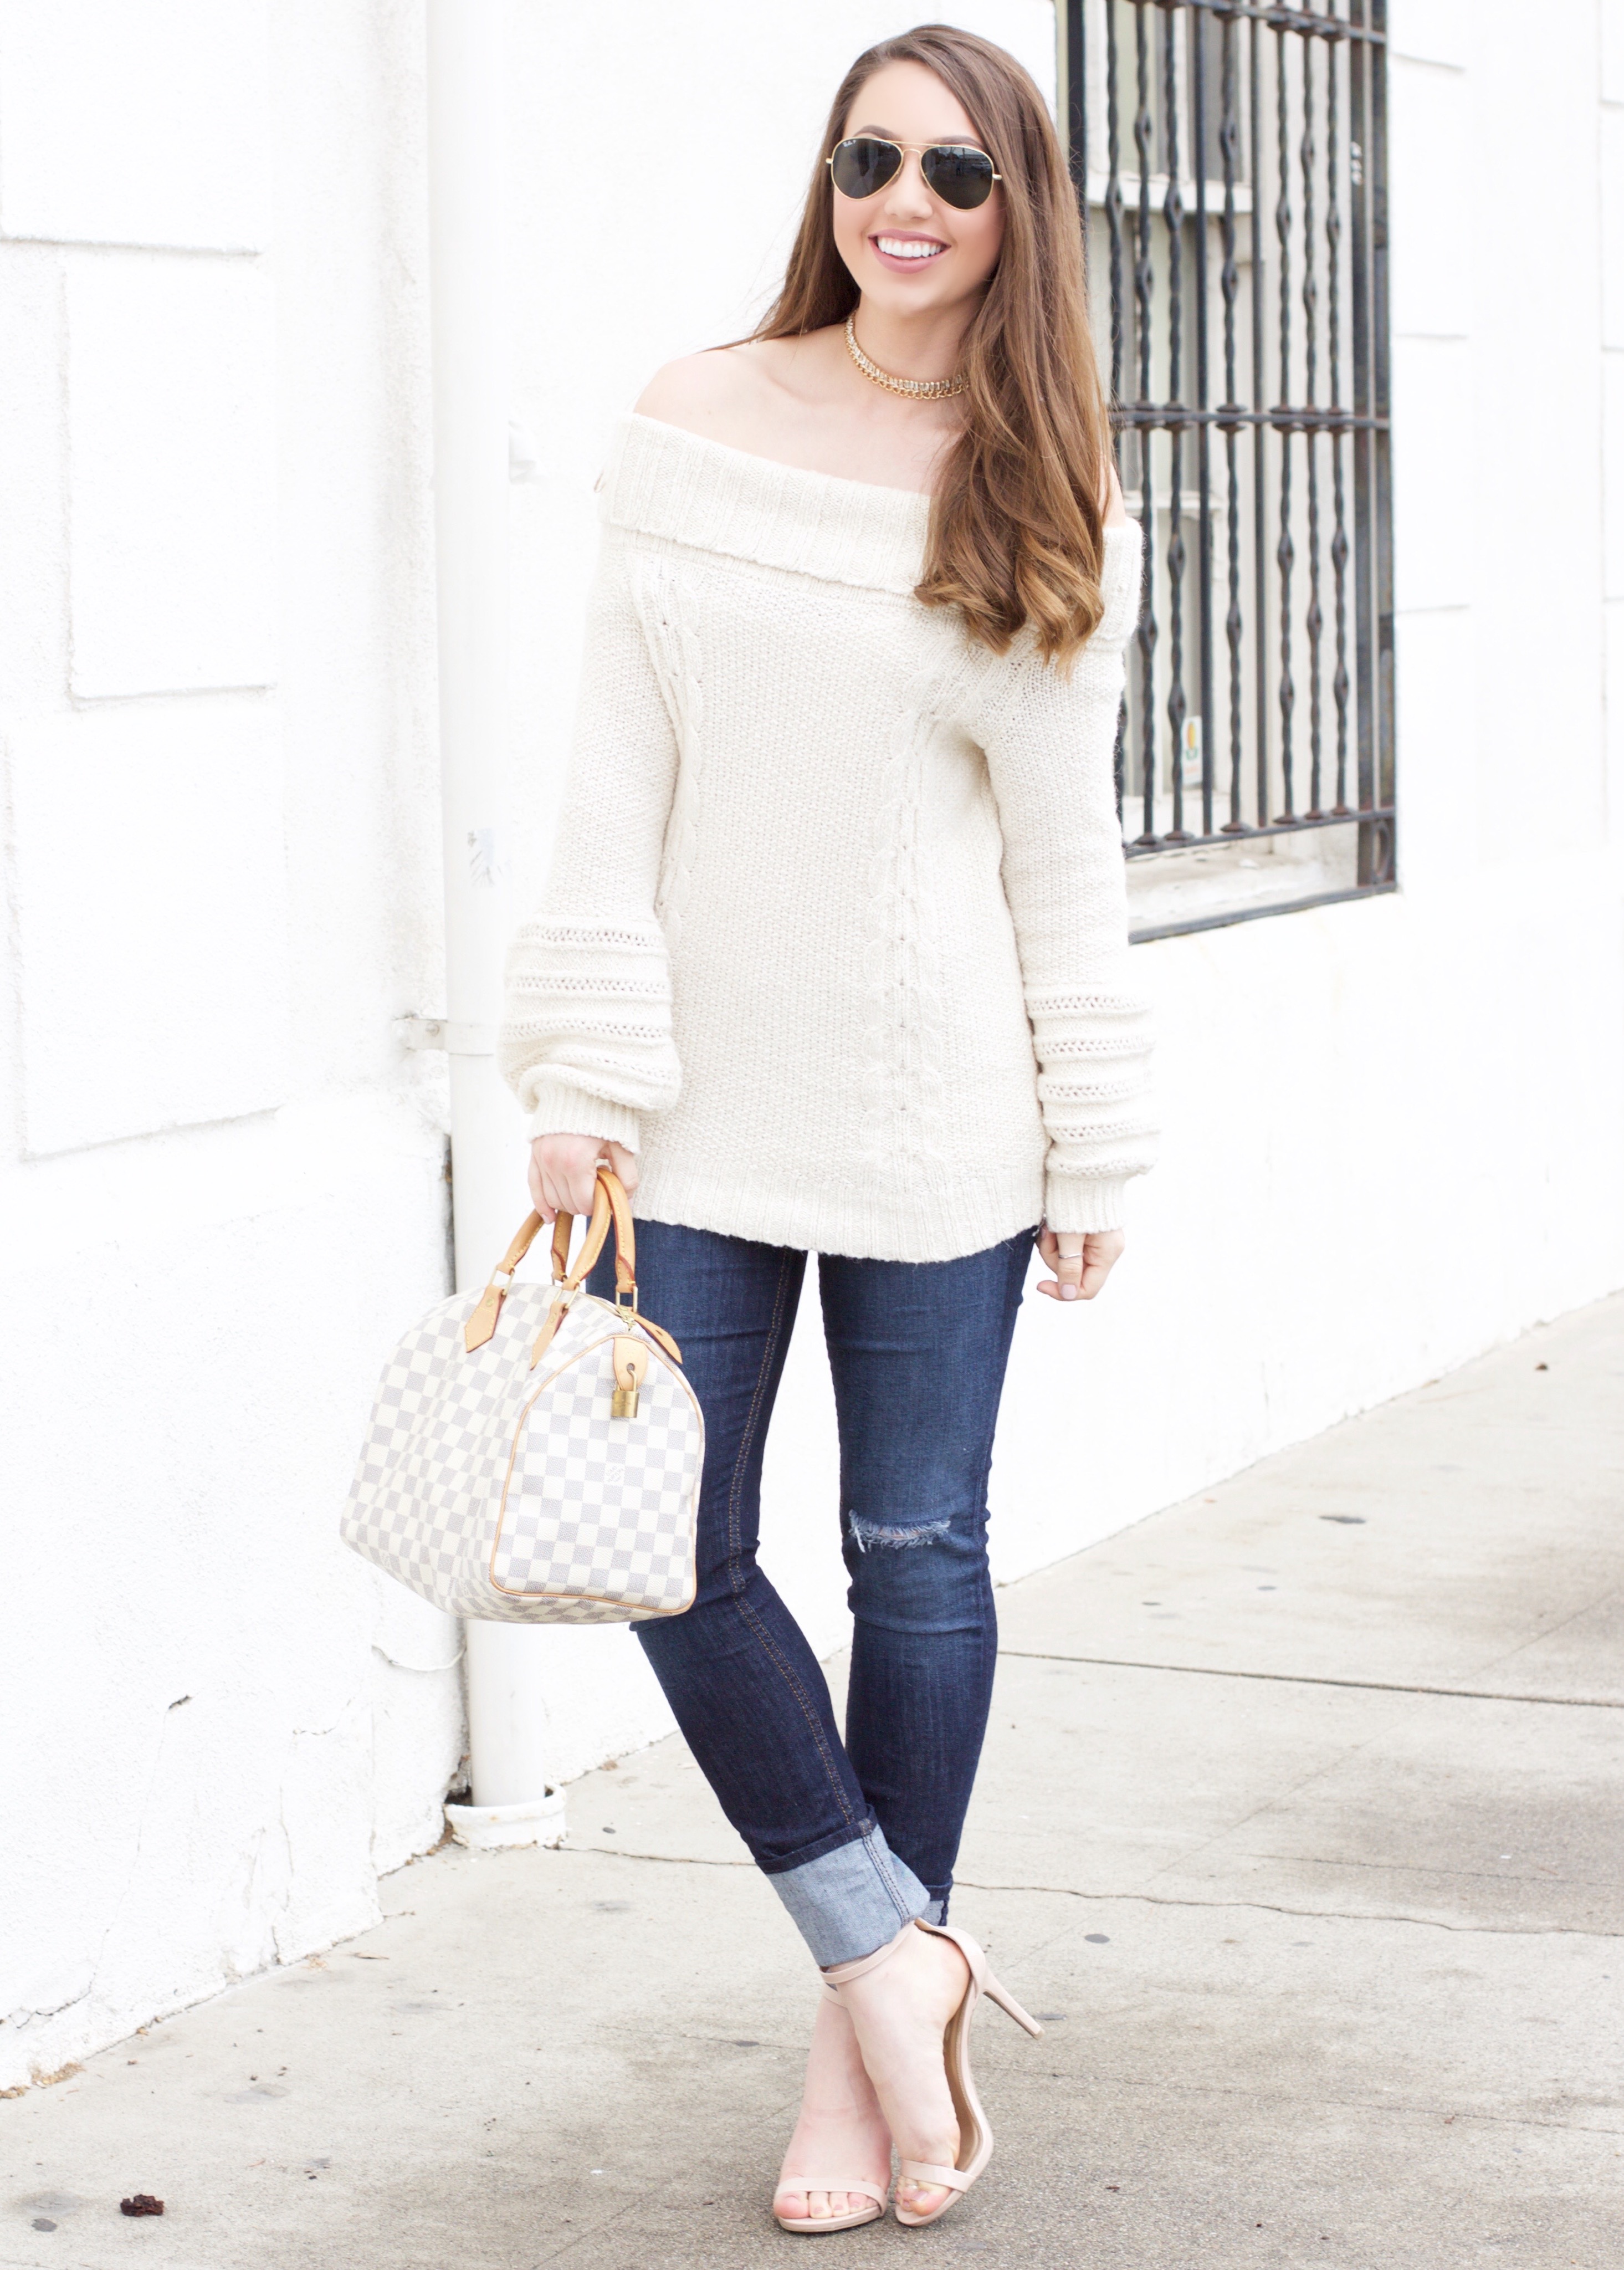 off the shoulder sweater outfit 2017